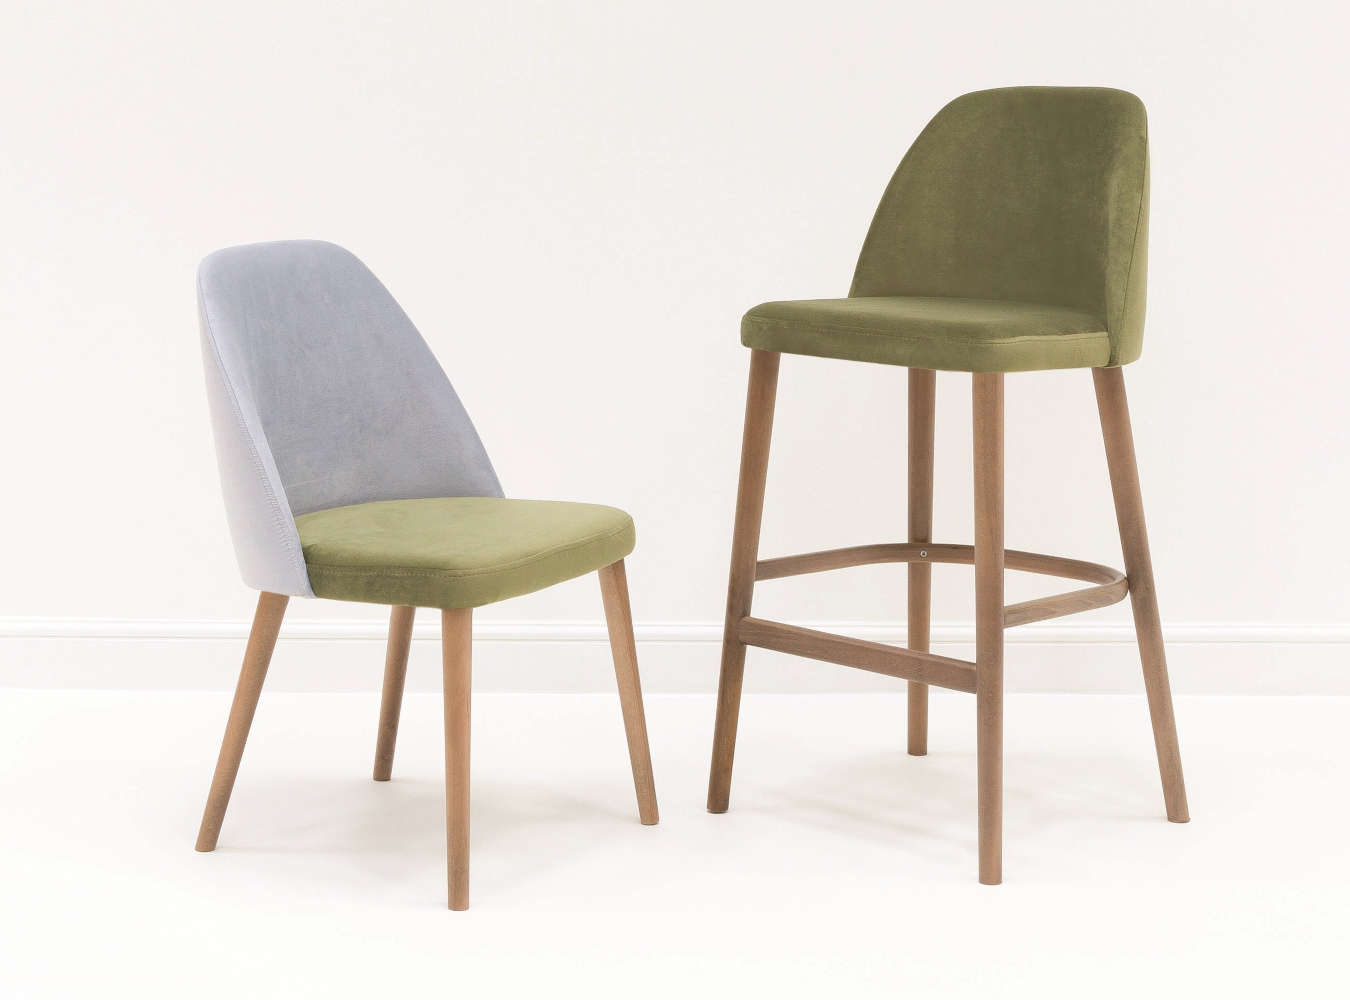 View Chairs, Stools & Seating category